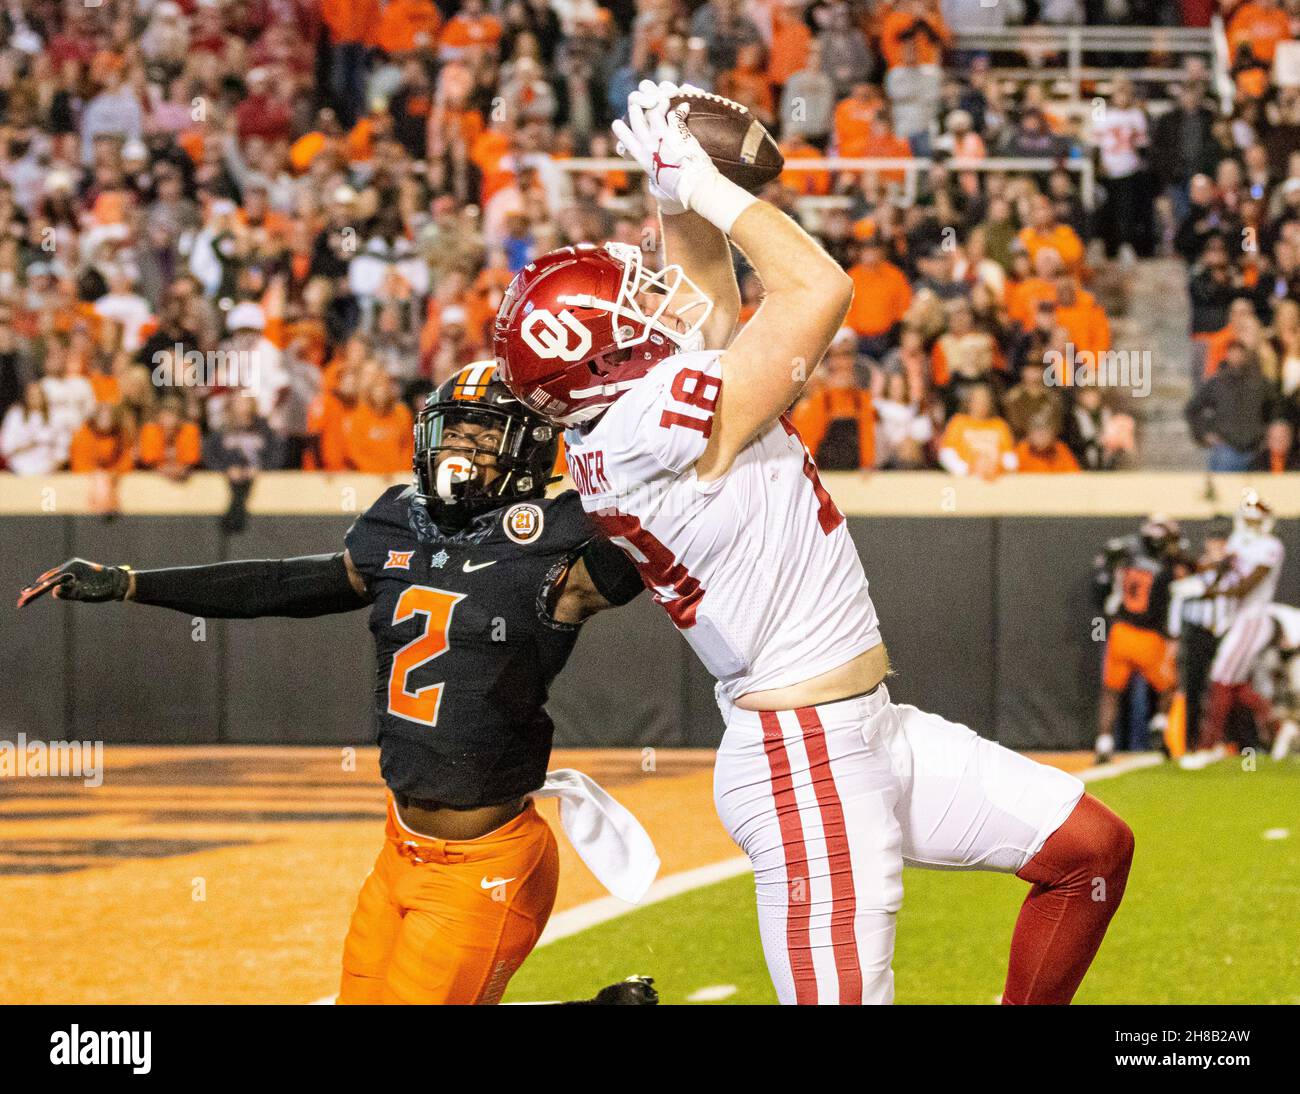 Stillwater, Oklahoma, USA. 27th Nov, 2021. Oklahoma Sooners tight end Austin Stogner (18) catching the football before falling into the endzone for a Sooners touchdown during the game on Saturday, November 27, 2021 at Boone Pickens Stadium in Stillwater, Oklahoma. (Credit Image: © Nicholas Rutledge/ZUMA Press Wire) Stock Photo